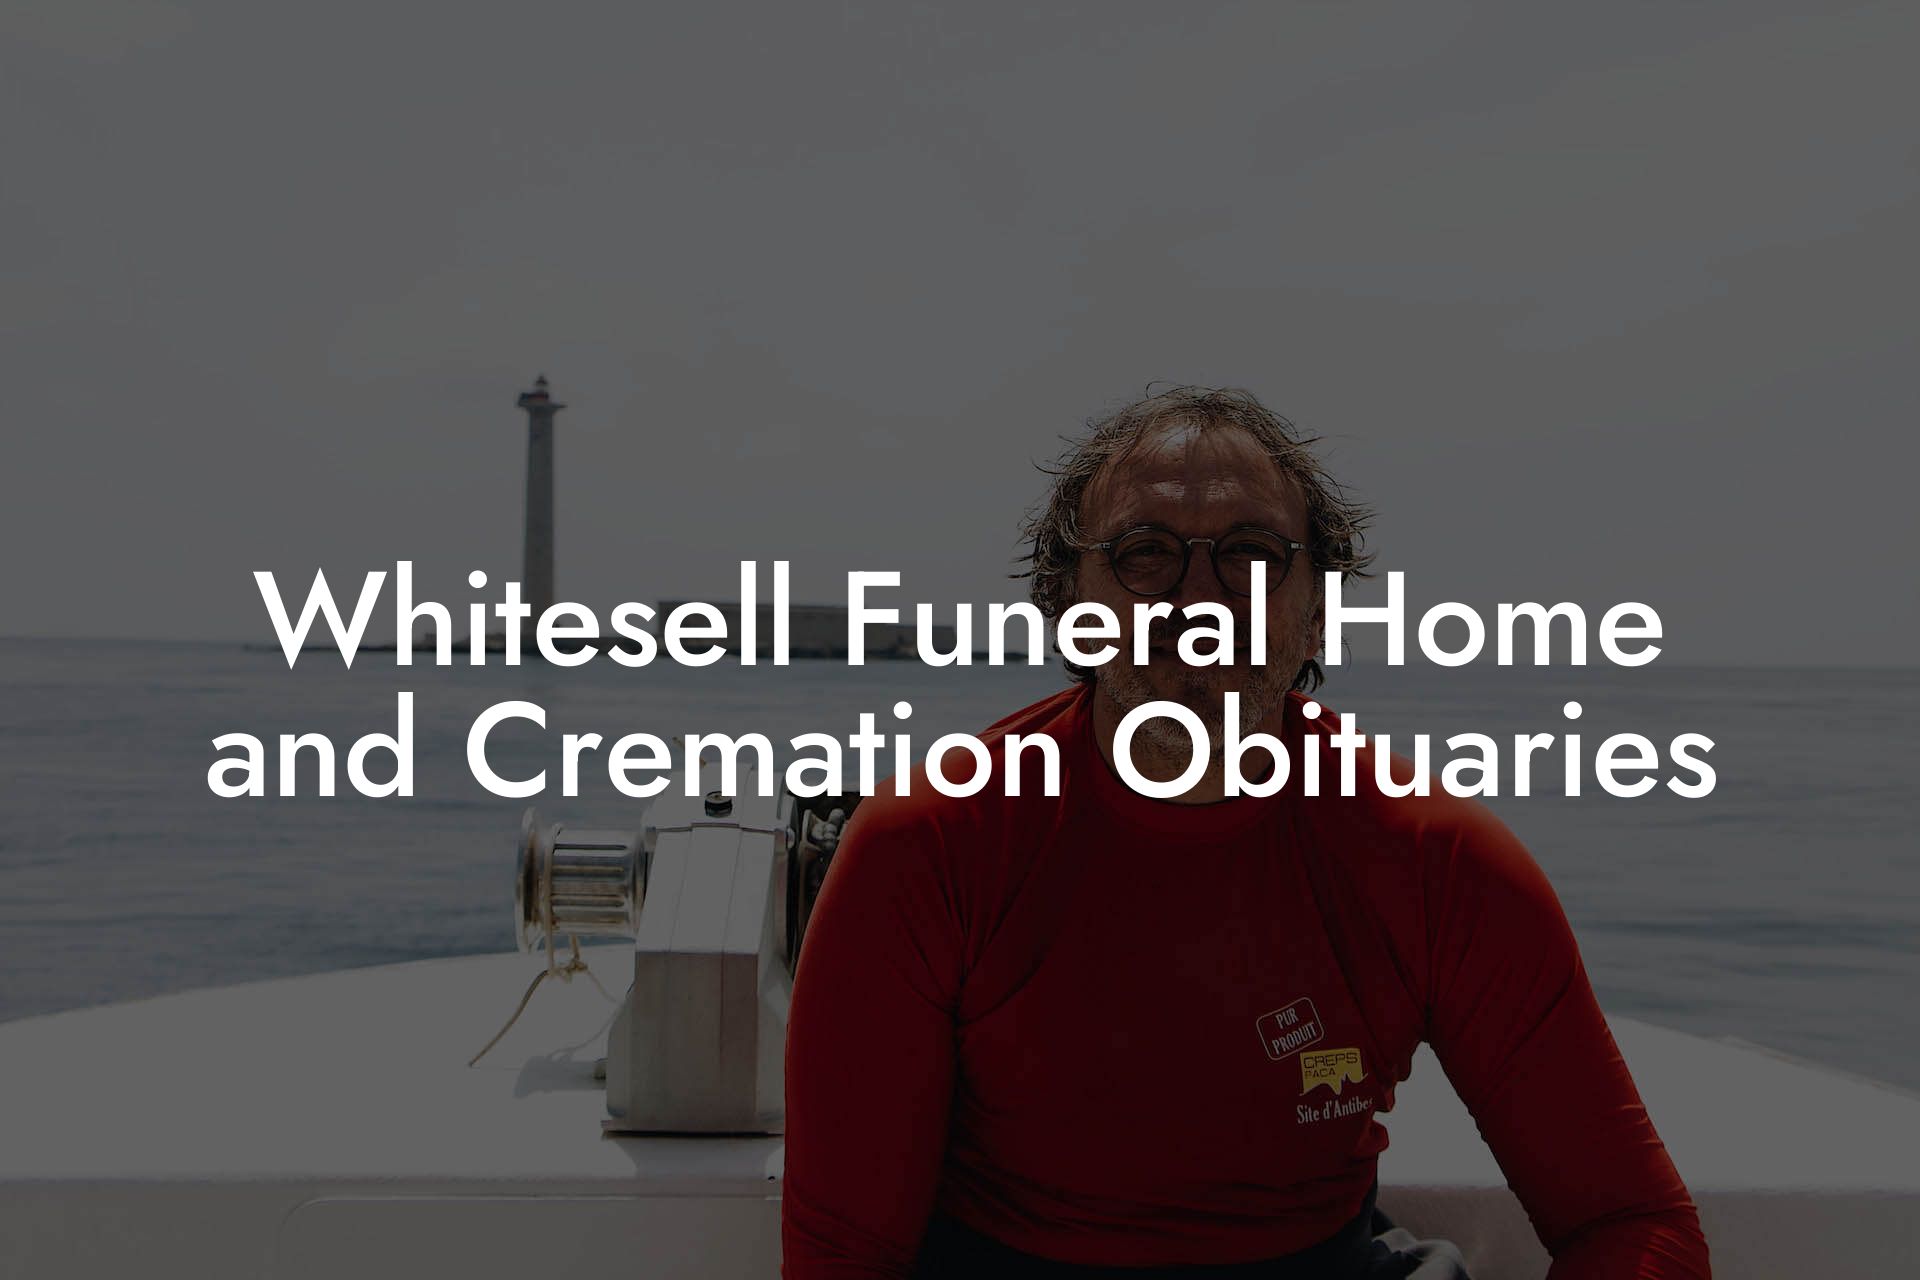 Whitesell Funeral Home and Cremation Obituaries